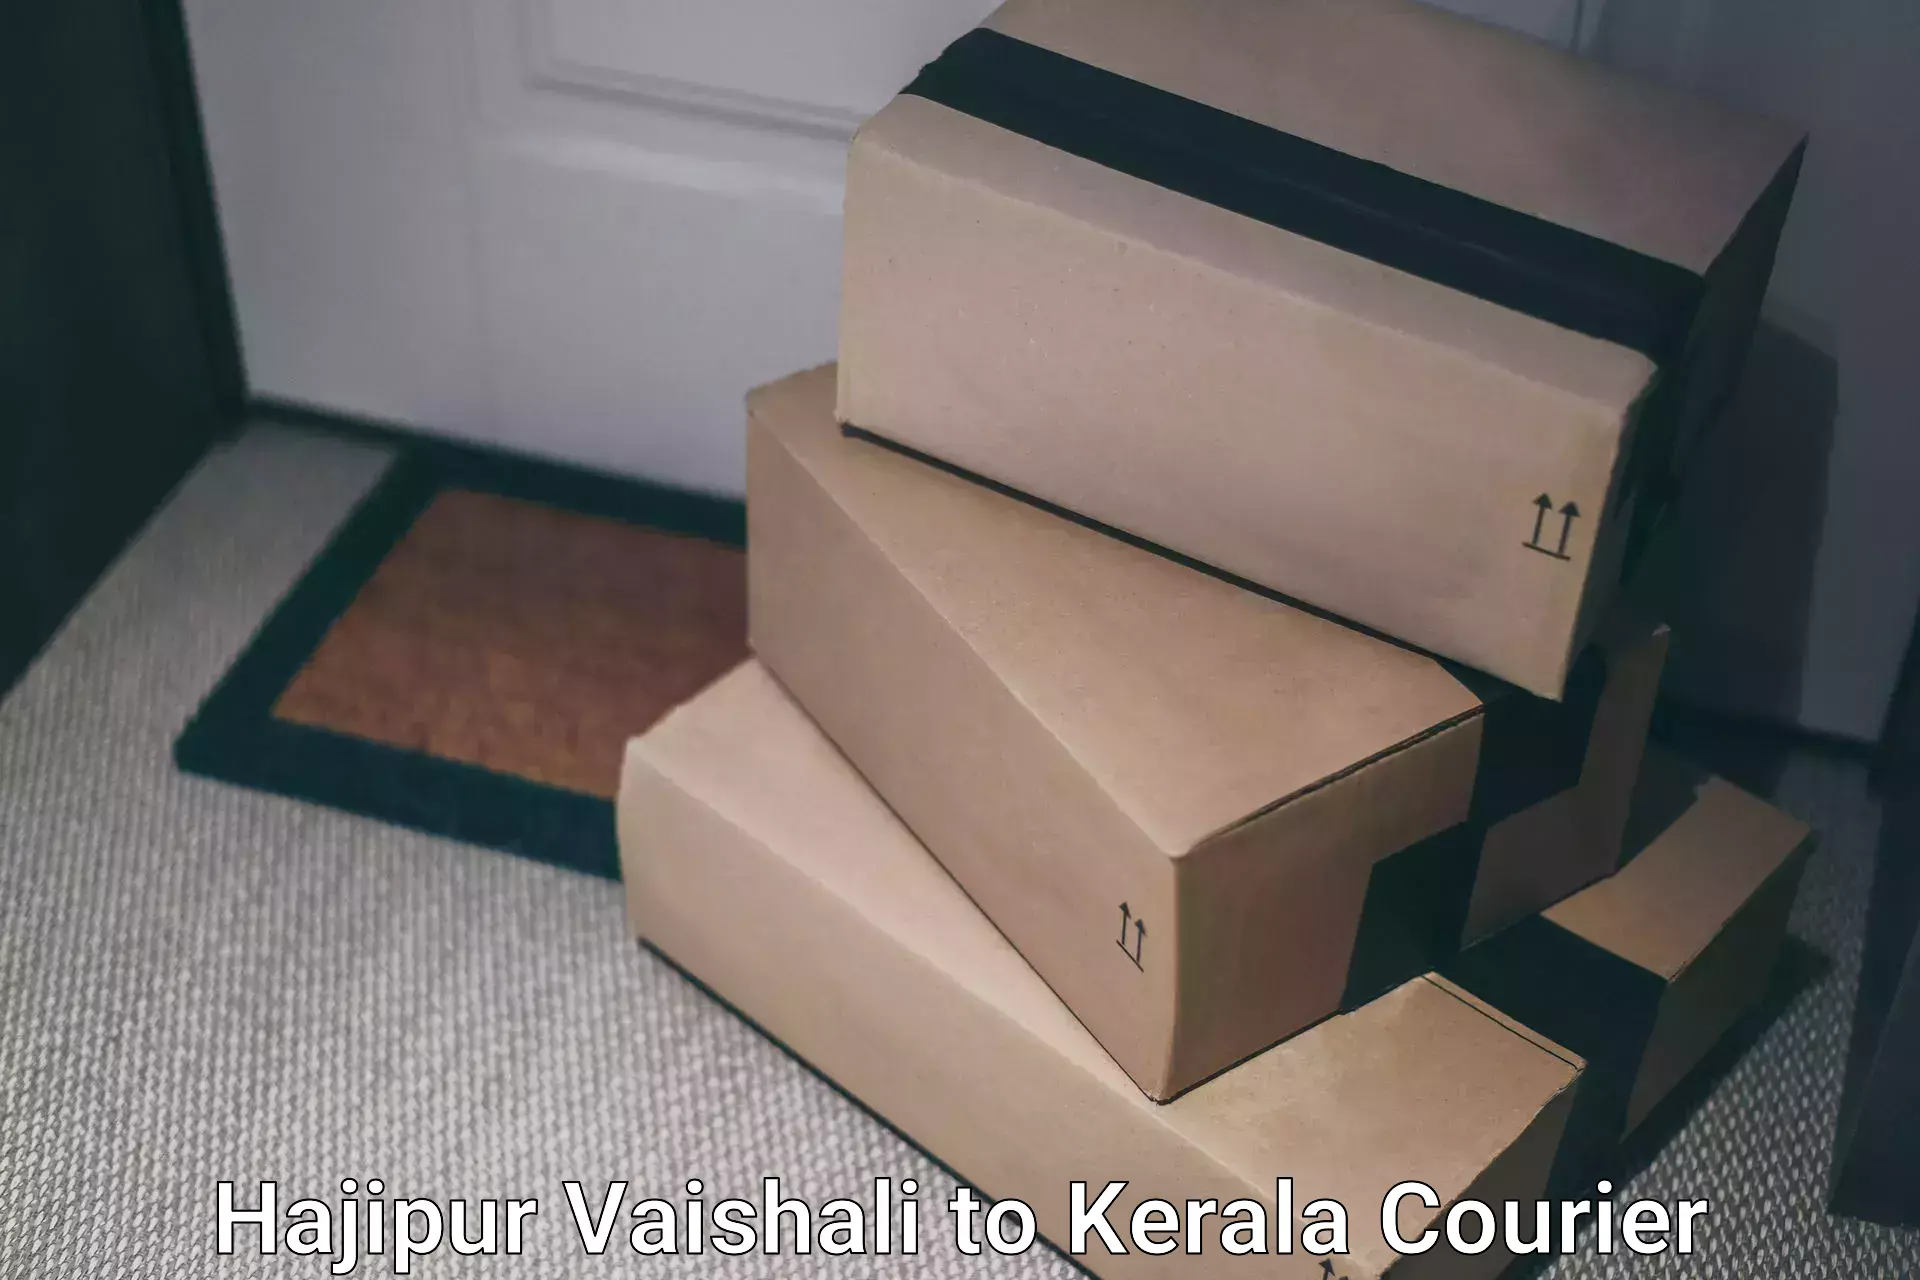 State-of-the-art courier technology Hajipur Vaishali to Tirur